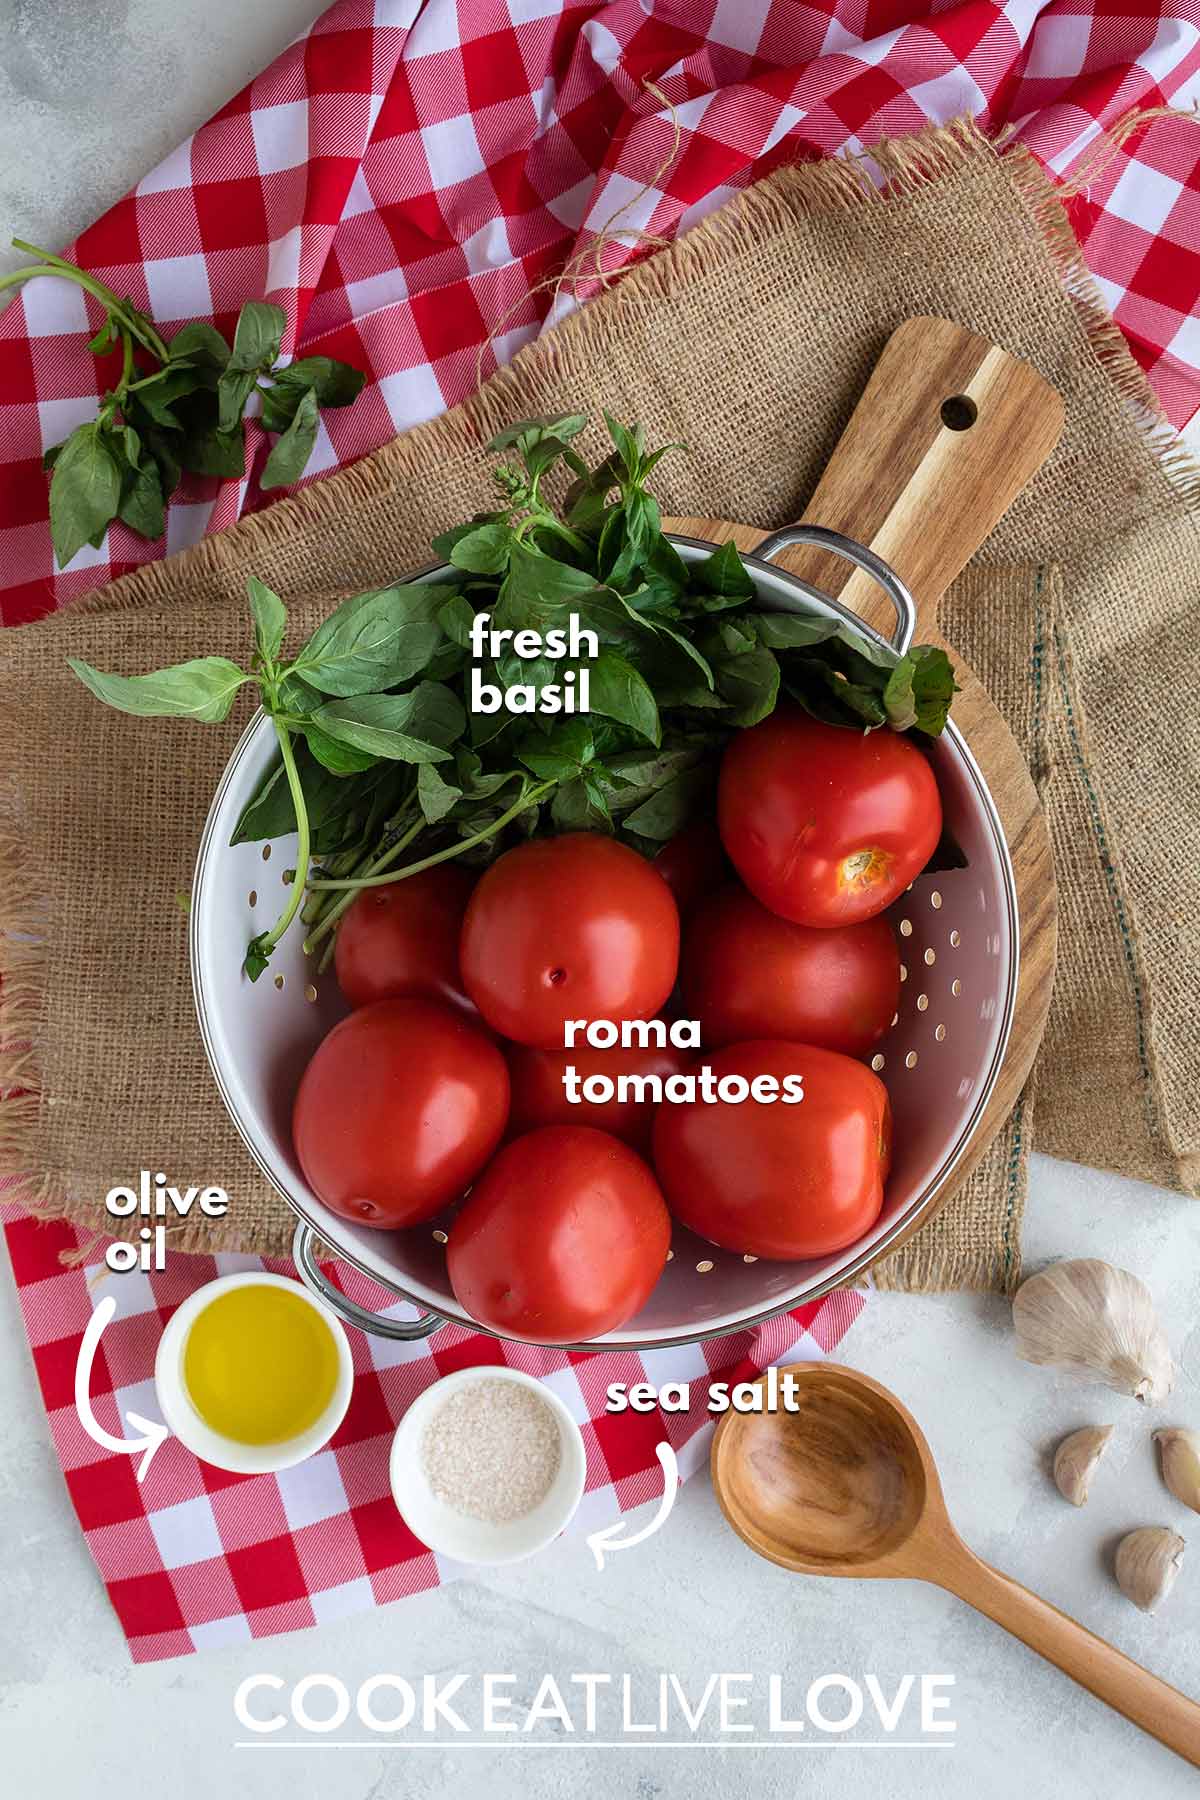 Ingredients to make no cook pizza sauce with fresh tomatoes.